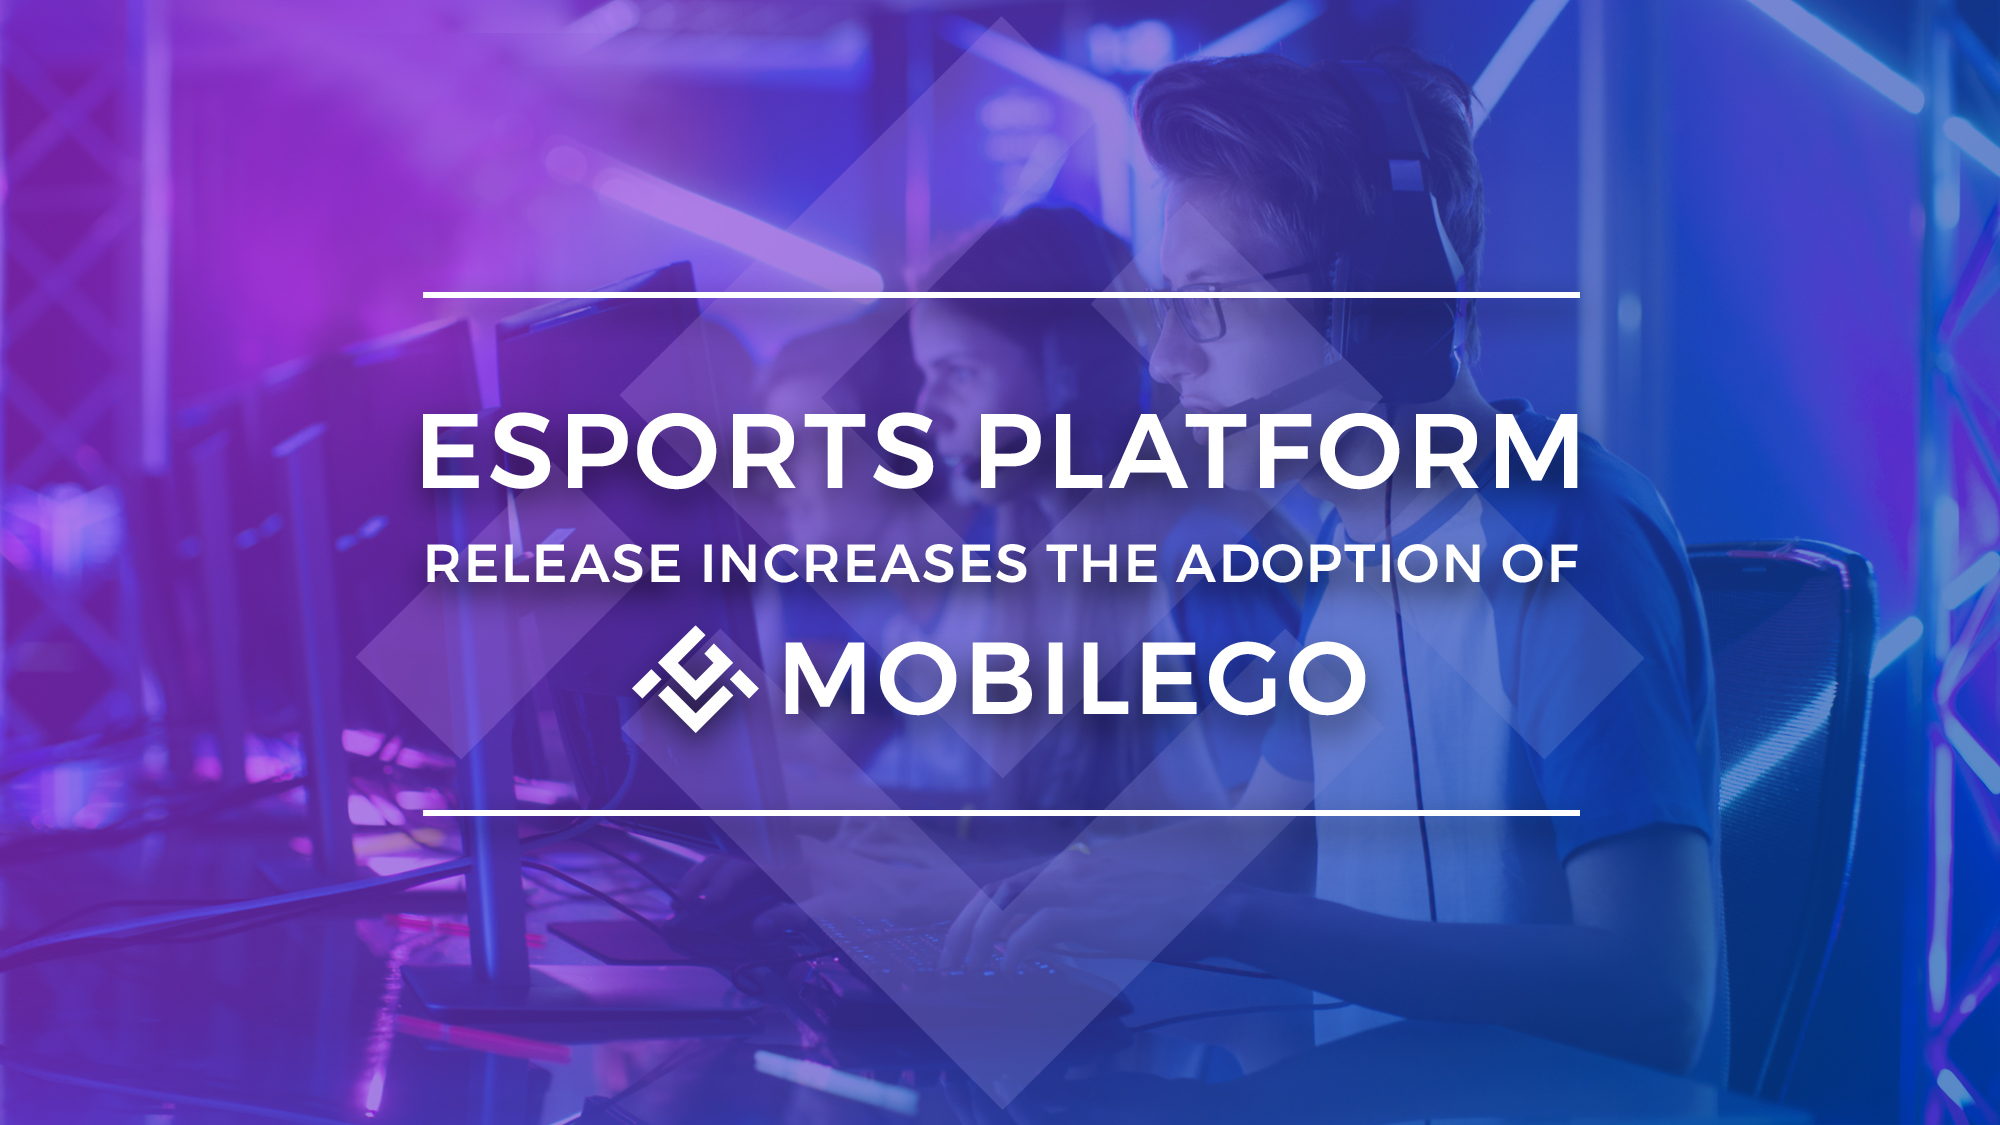 Press Release: Esports Platform Release Increases the Adoption of Mobilego (MGO) Tokens